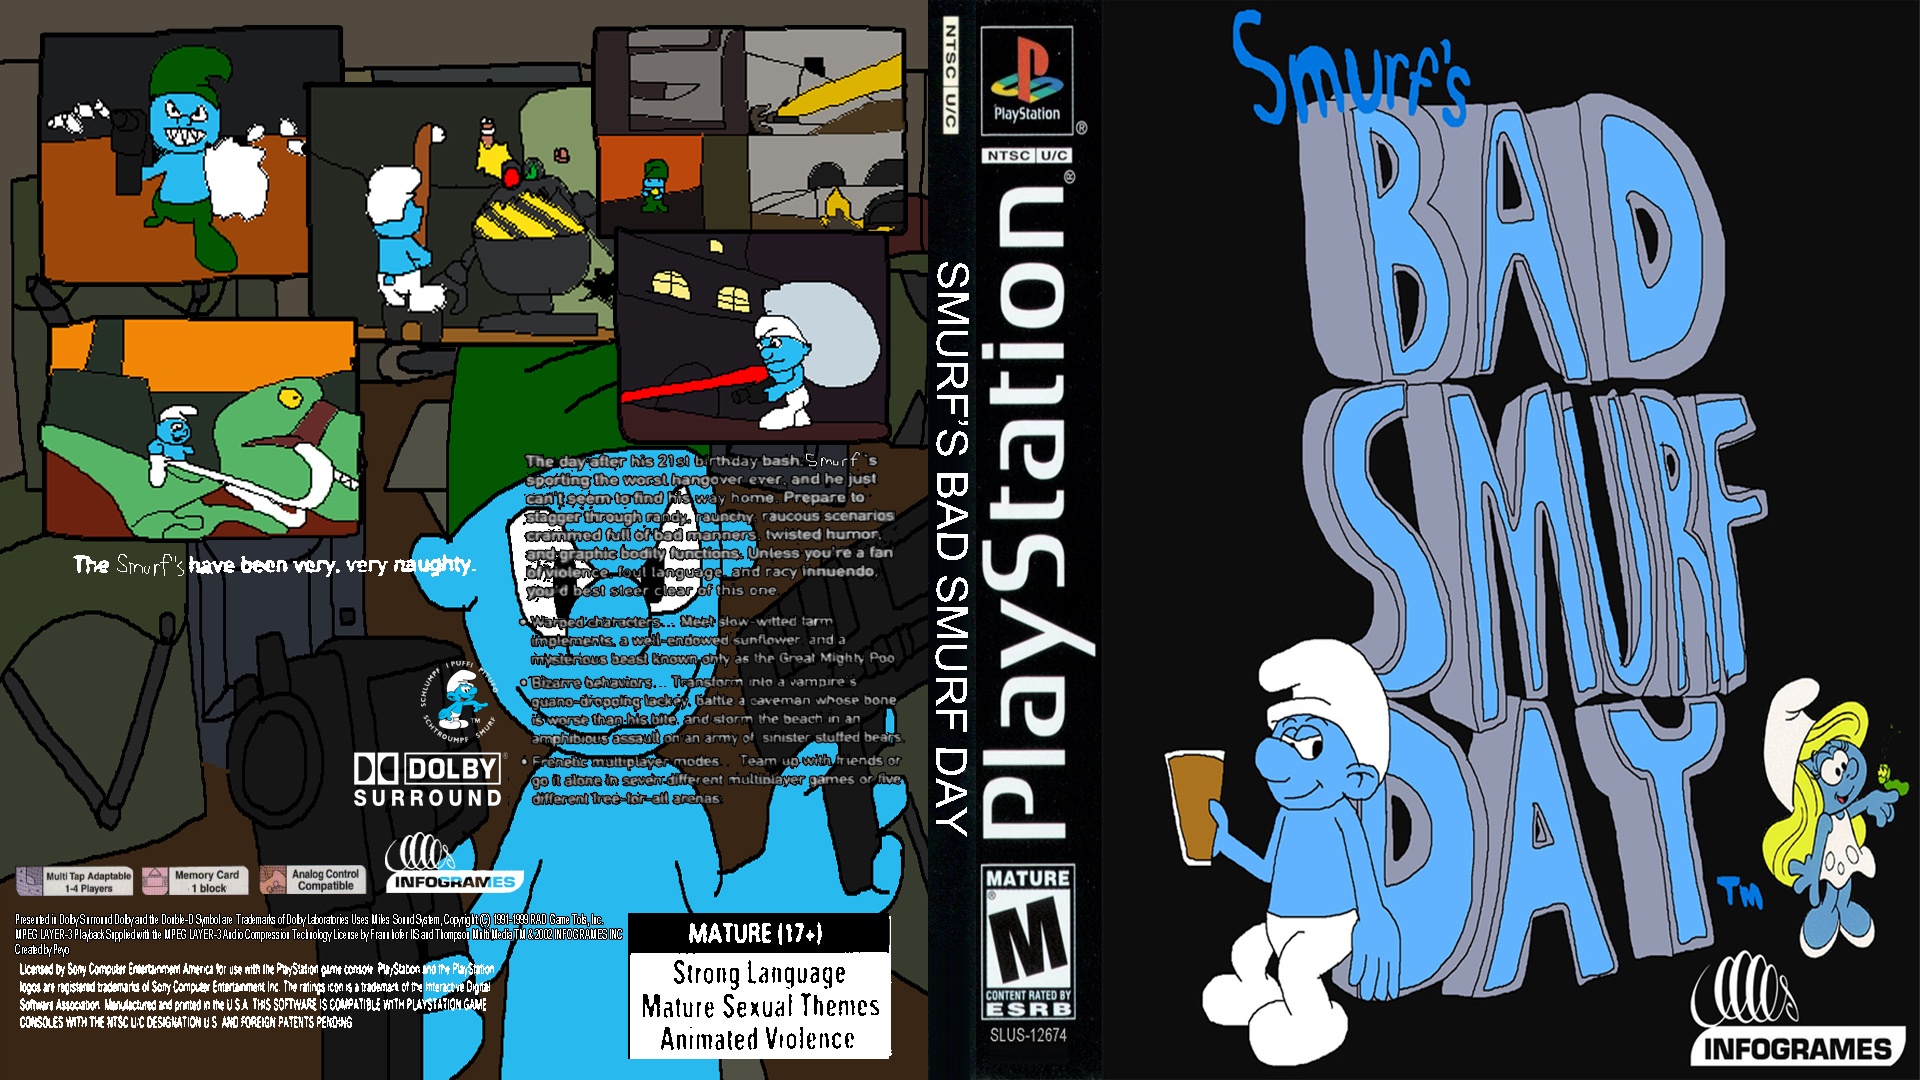 Smurf's Bad Smurf Day box cover